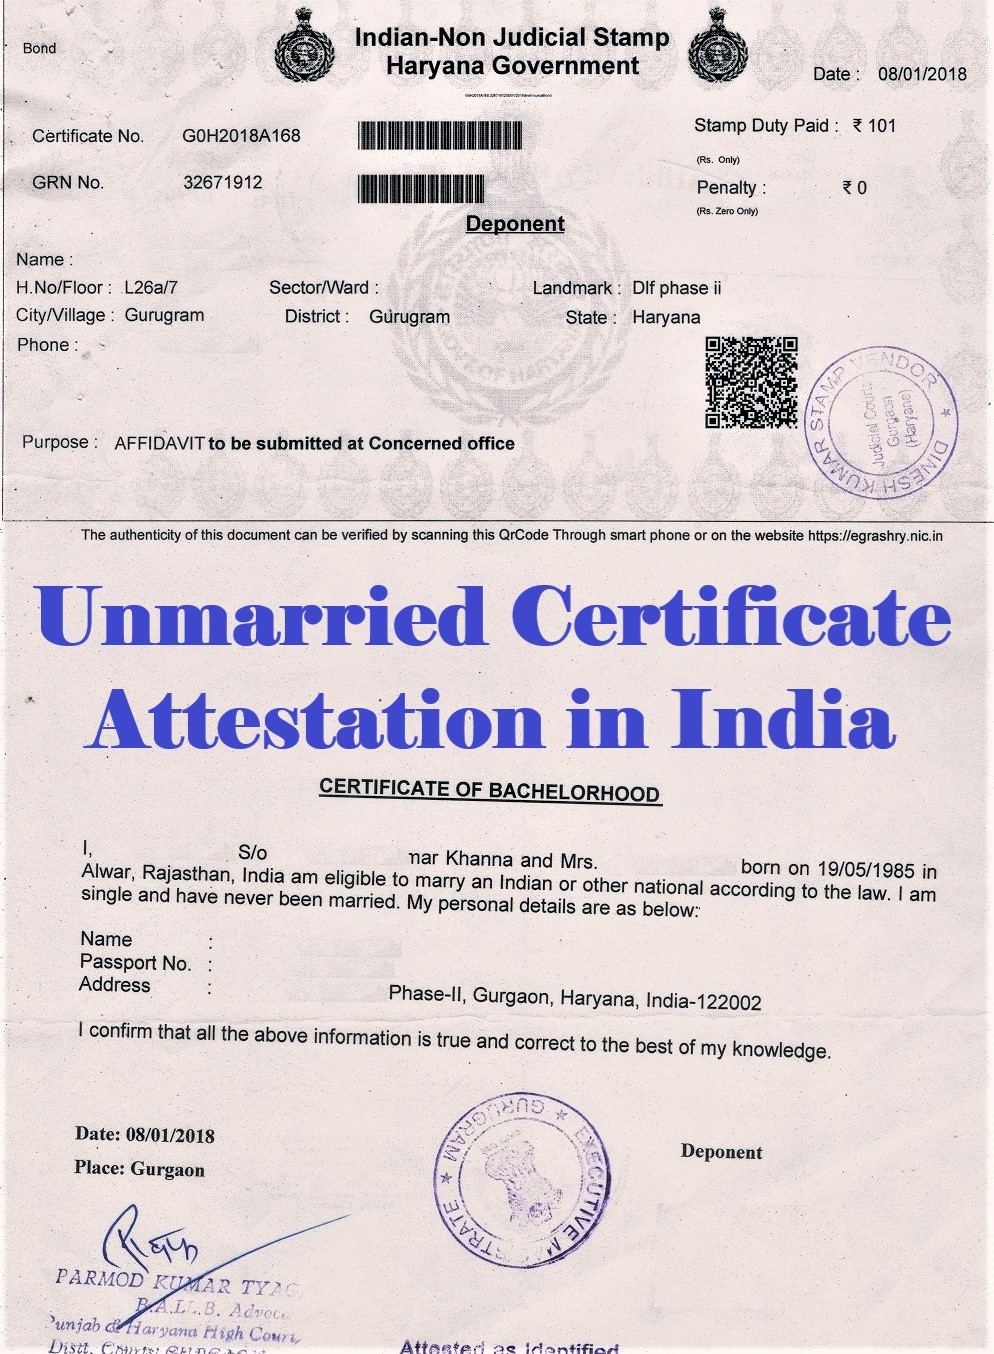 Unmarried Certificate Attestation from Saint Lucia Embassy